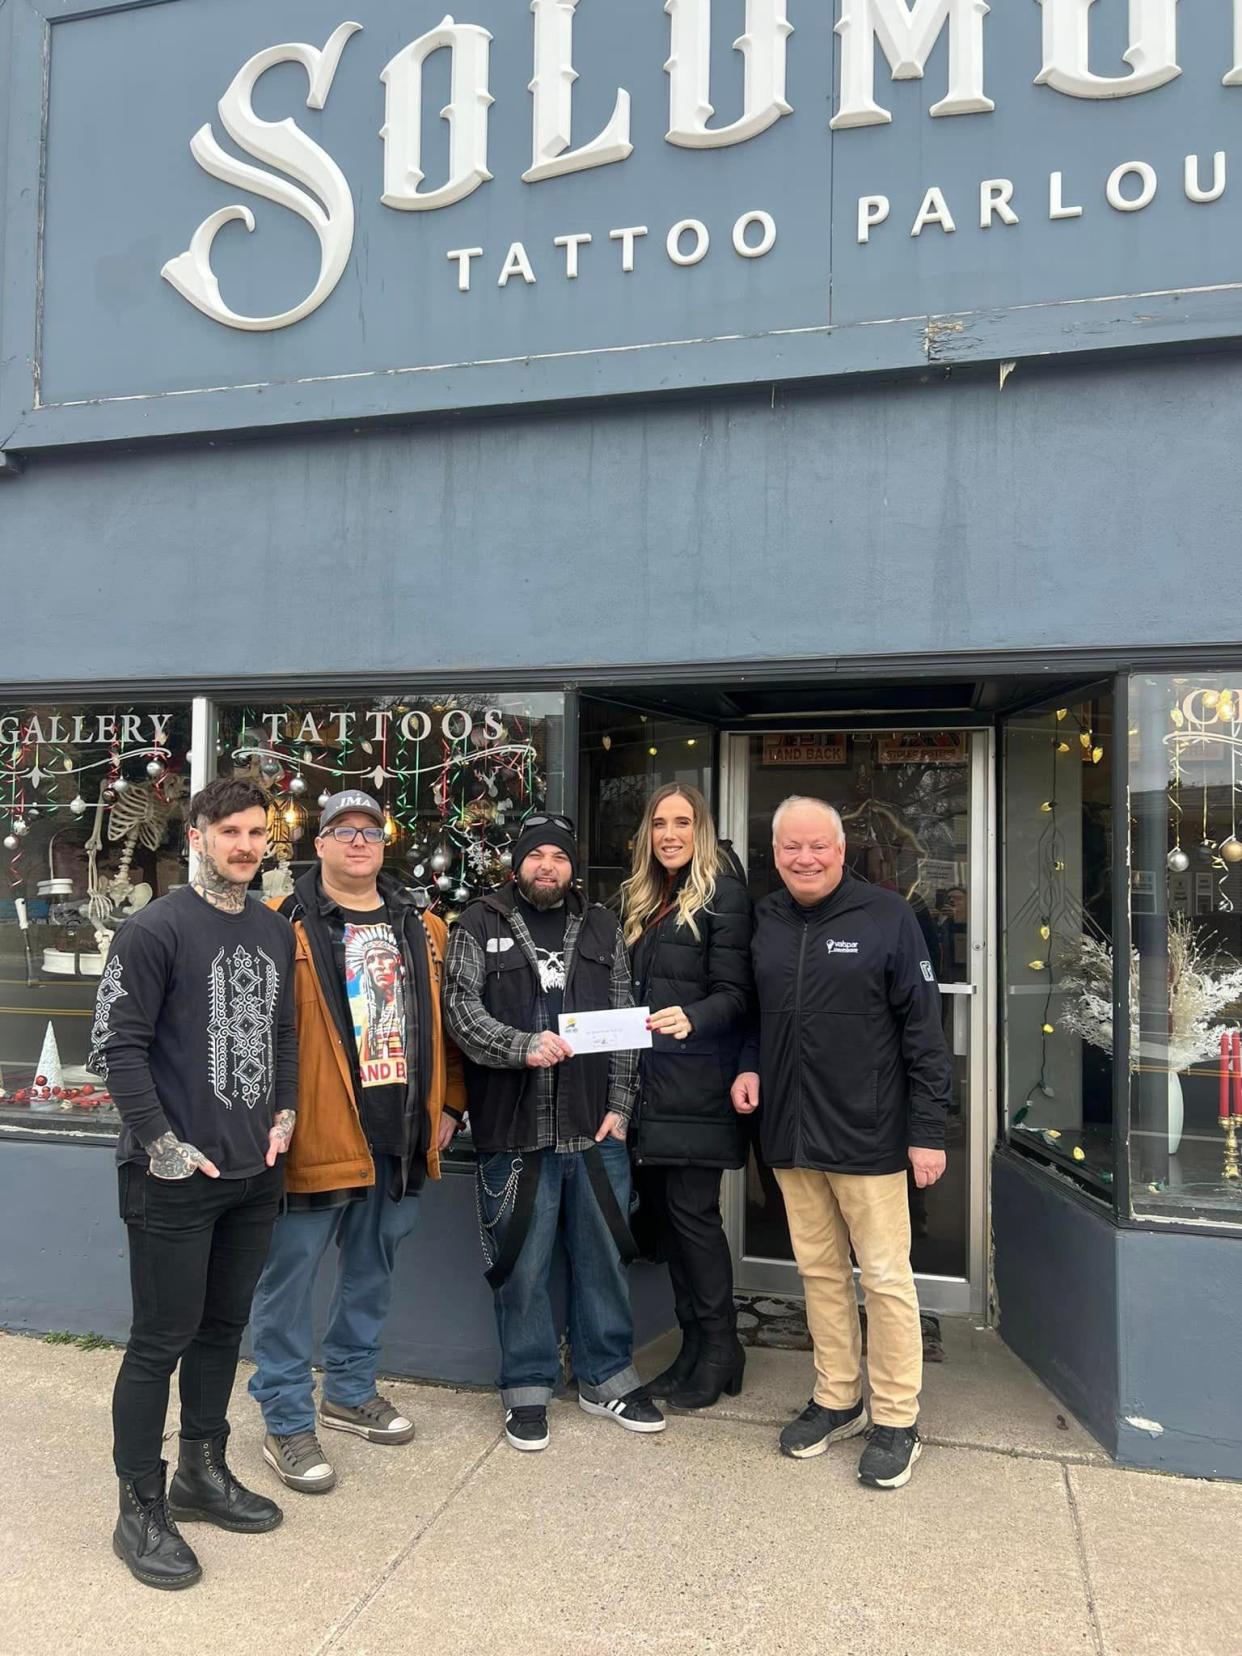 Chamber of Commerce Director Tony Haller and DDA Director Stephanie Sprecker announce Solomon's Tattoo Parlor as one of the winners of the second annual downtown business Christmas decoration contest.